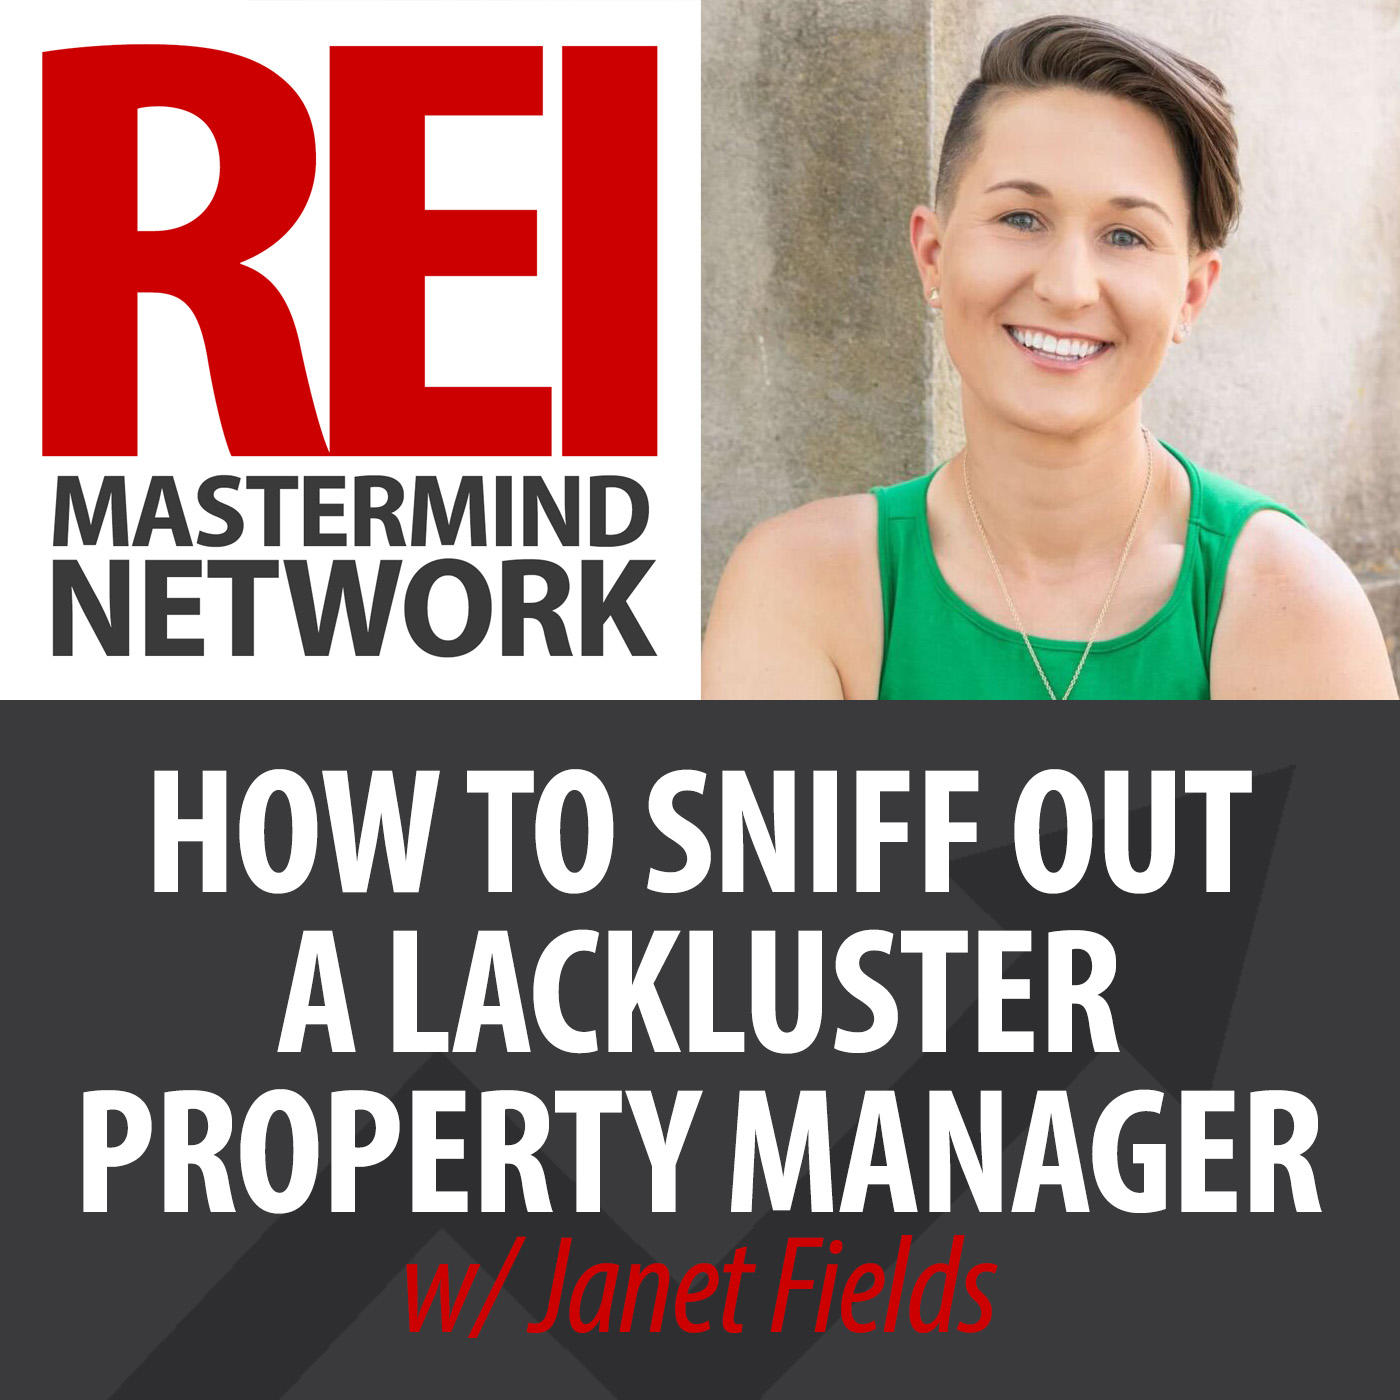 How to Sniff Out a Lackluster Property Manager with Janet Fields Image